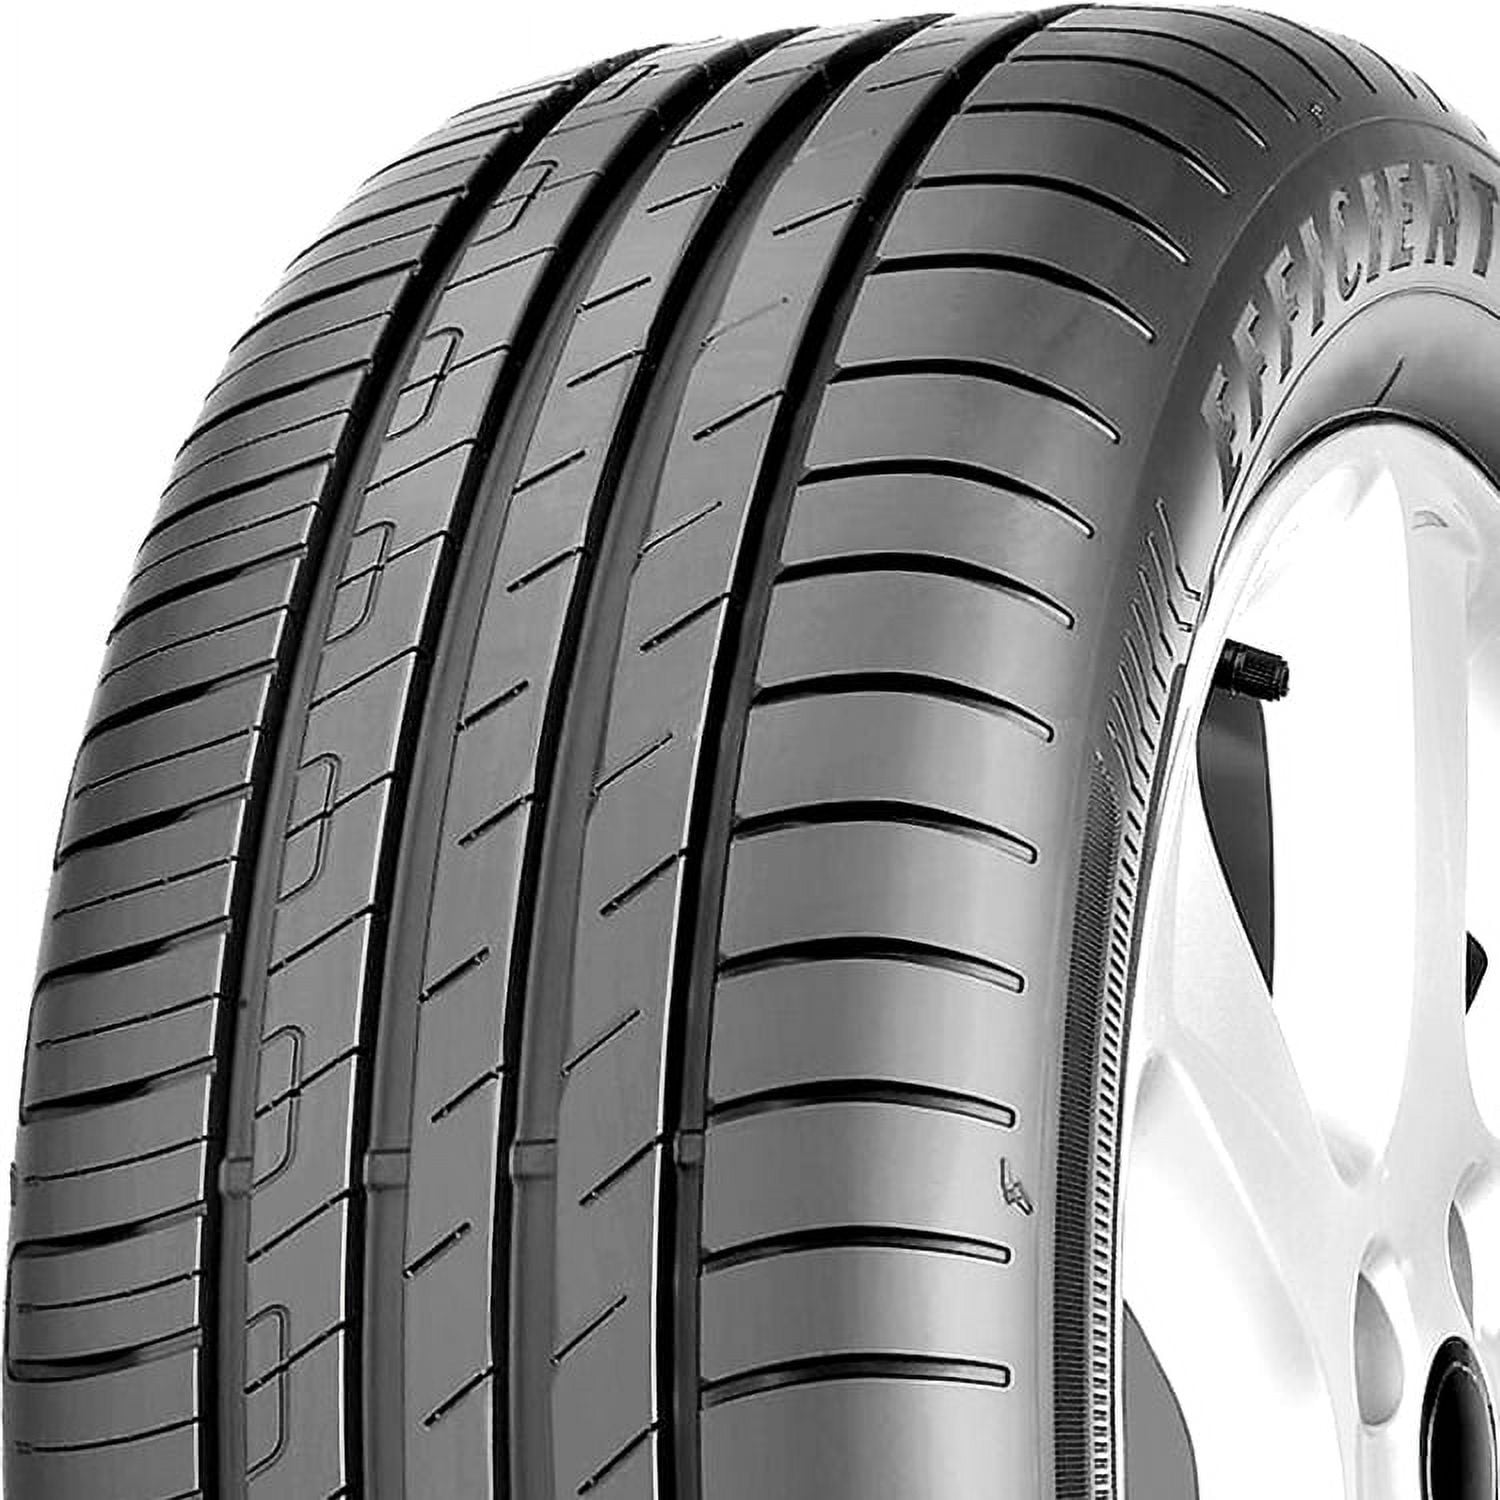 Touring, Performance Performance 195/55R16 XL Prius EfficientGrip 2007-09 91V 2005-06 Toyota Corolla Tire XRS Goodyear Toyota Fits: